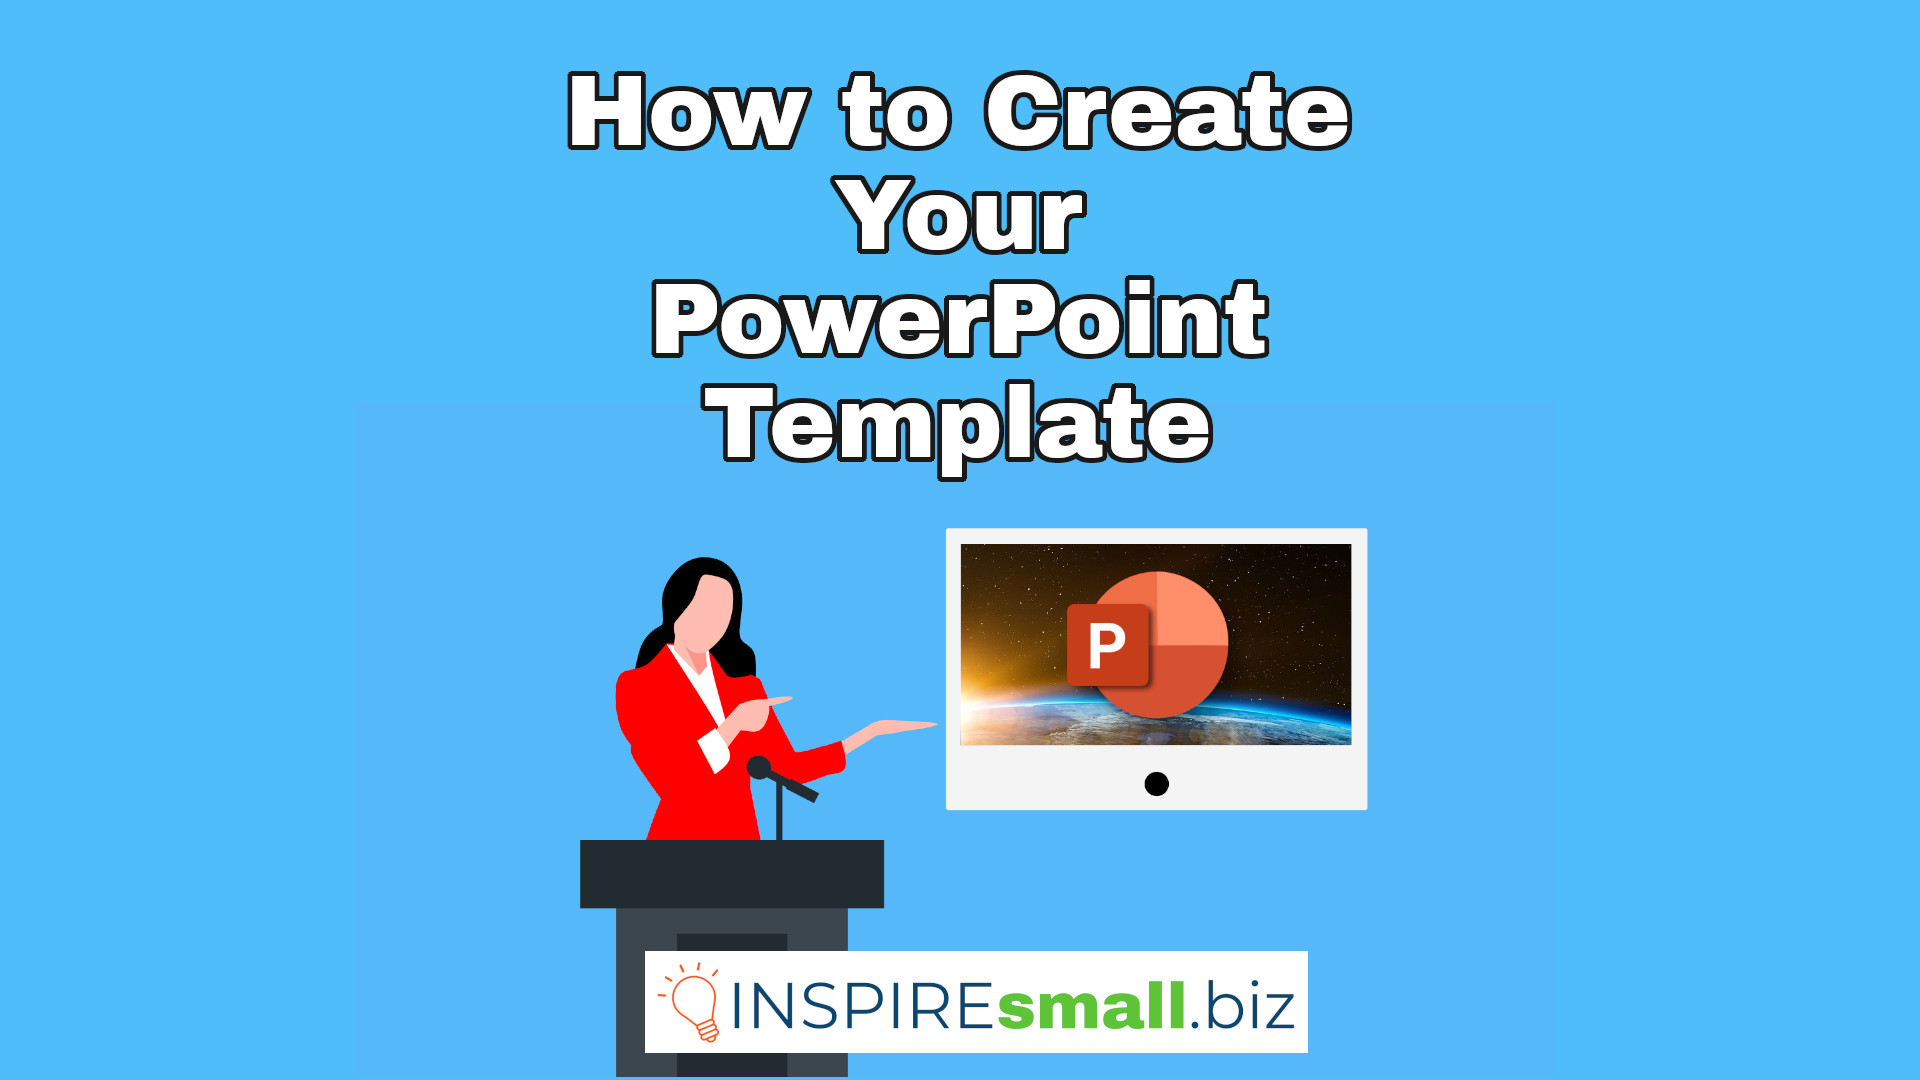 How to Create Your PowerPoint Template